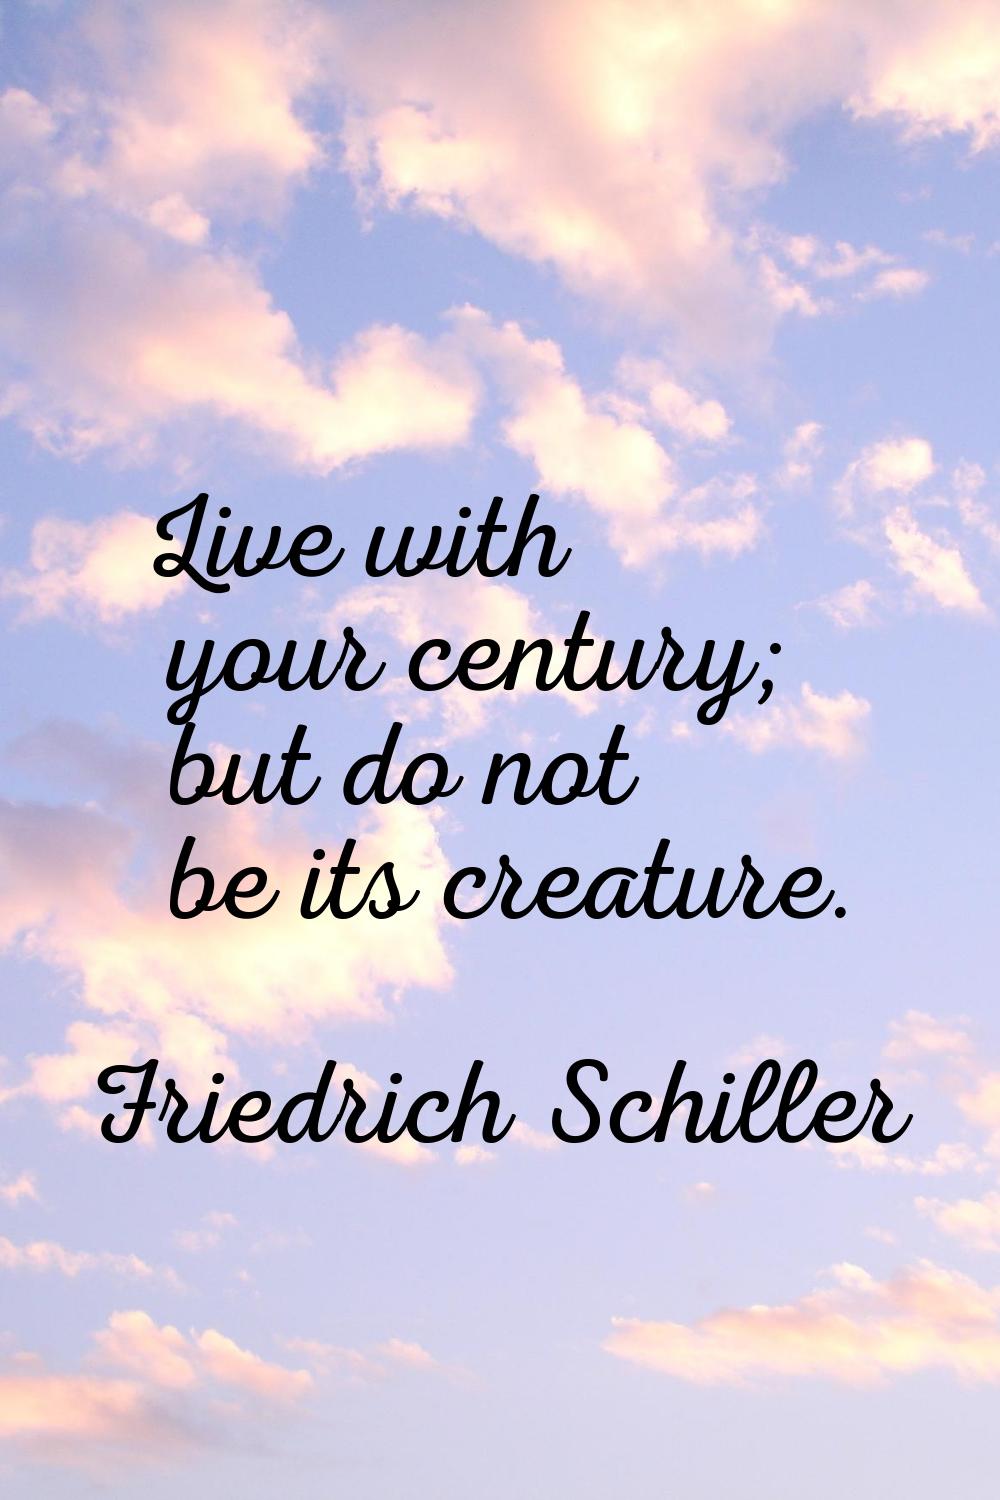 Live with your century; but do not be its creature.